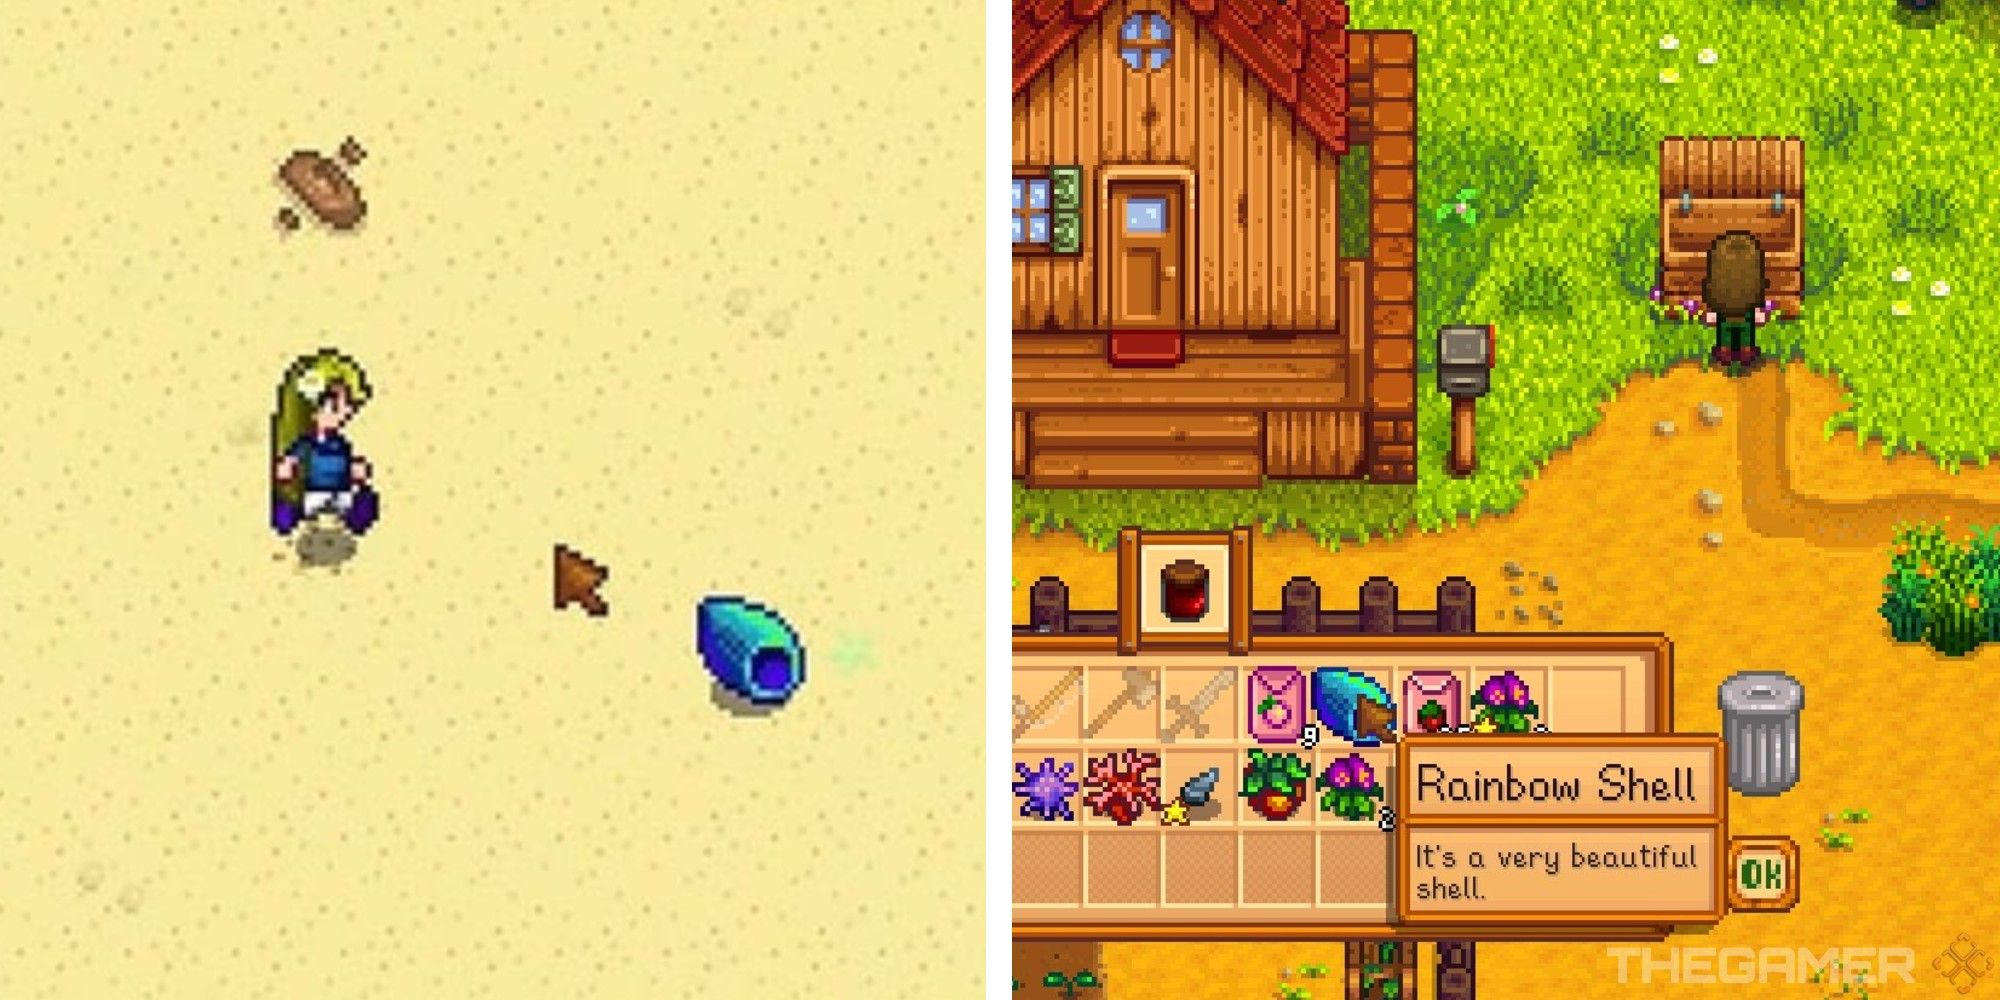 image of player finding a rainbow shell next to image of rainbow shell in player inventory